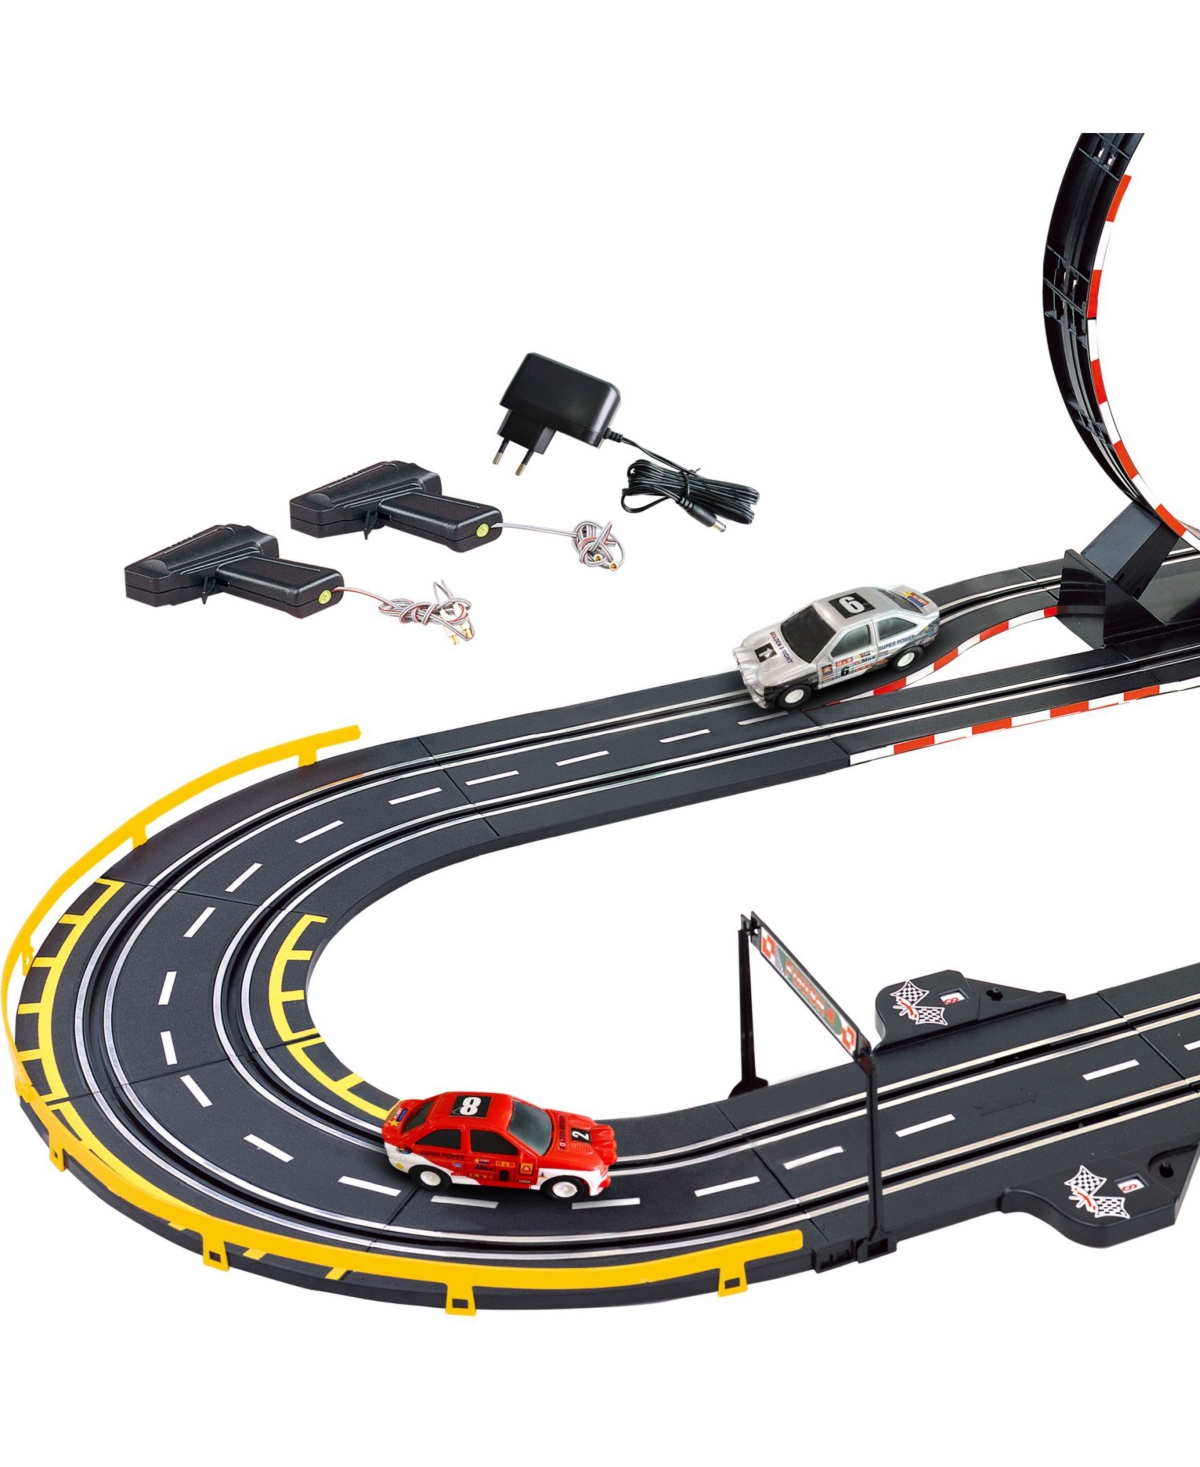 Shop Gb Pacific Parallel Looping Electric Power Road Racing Set In Black